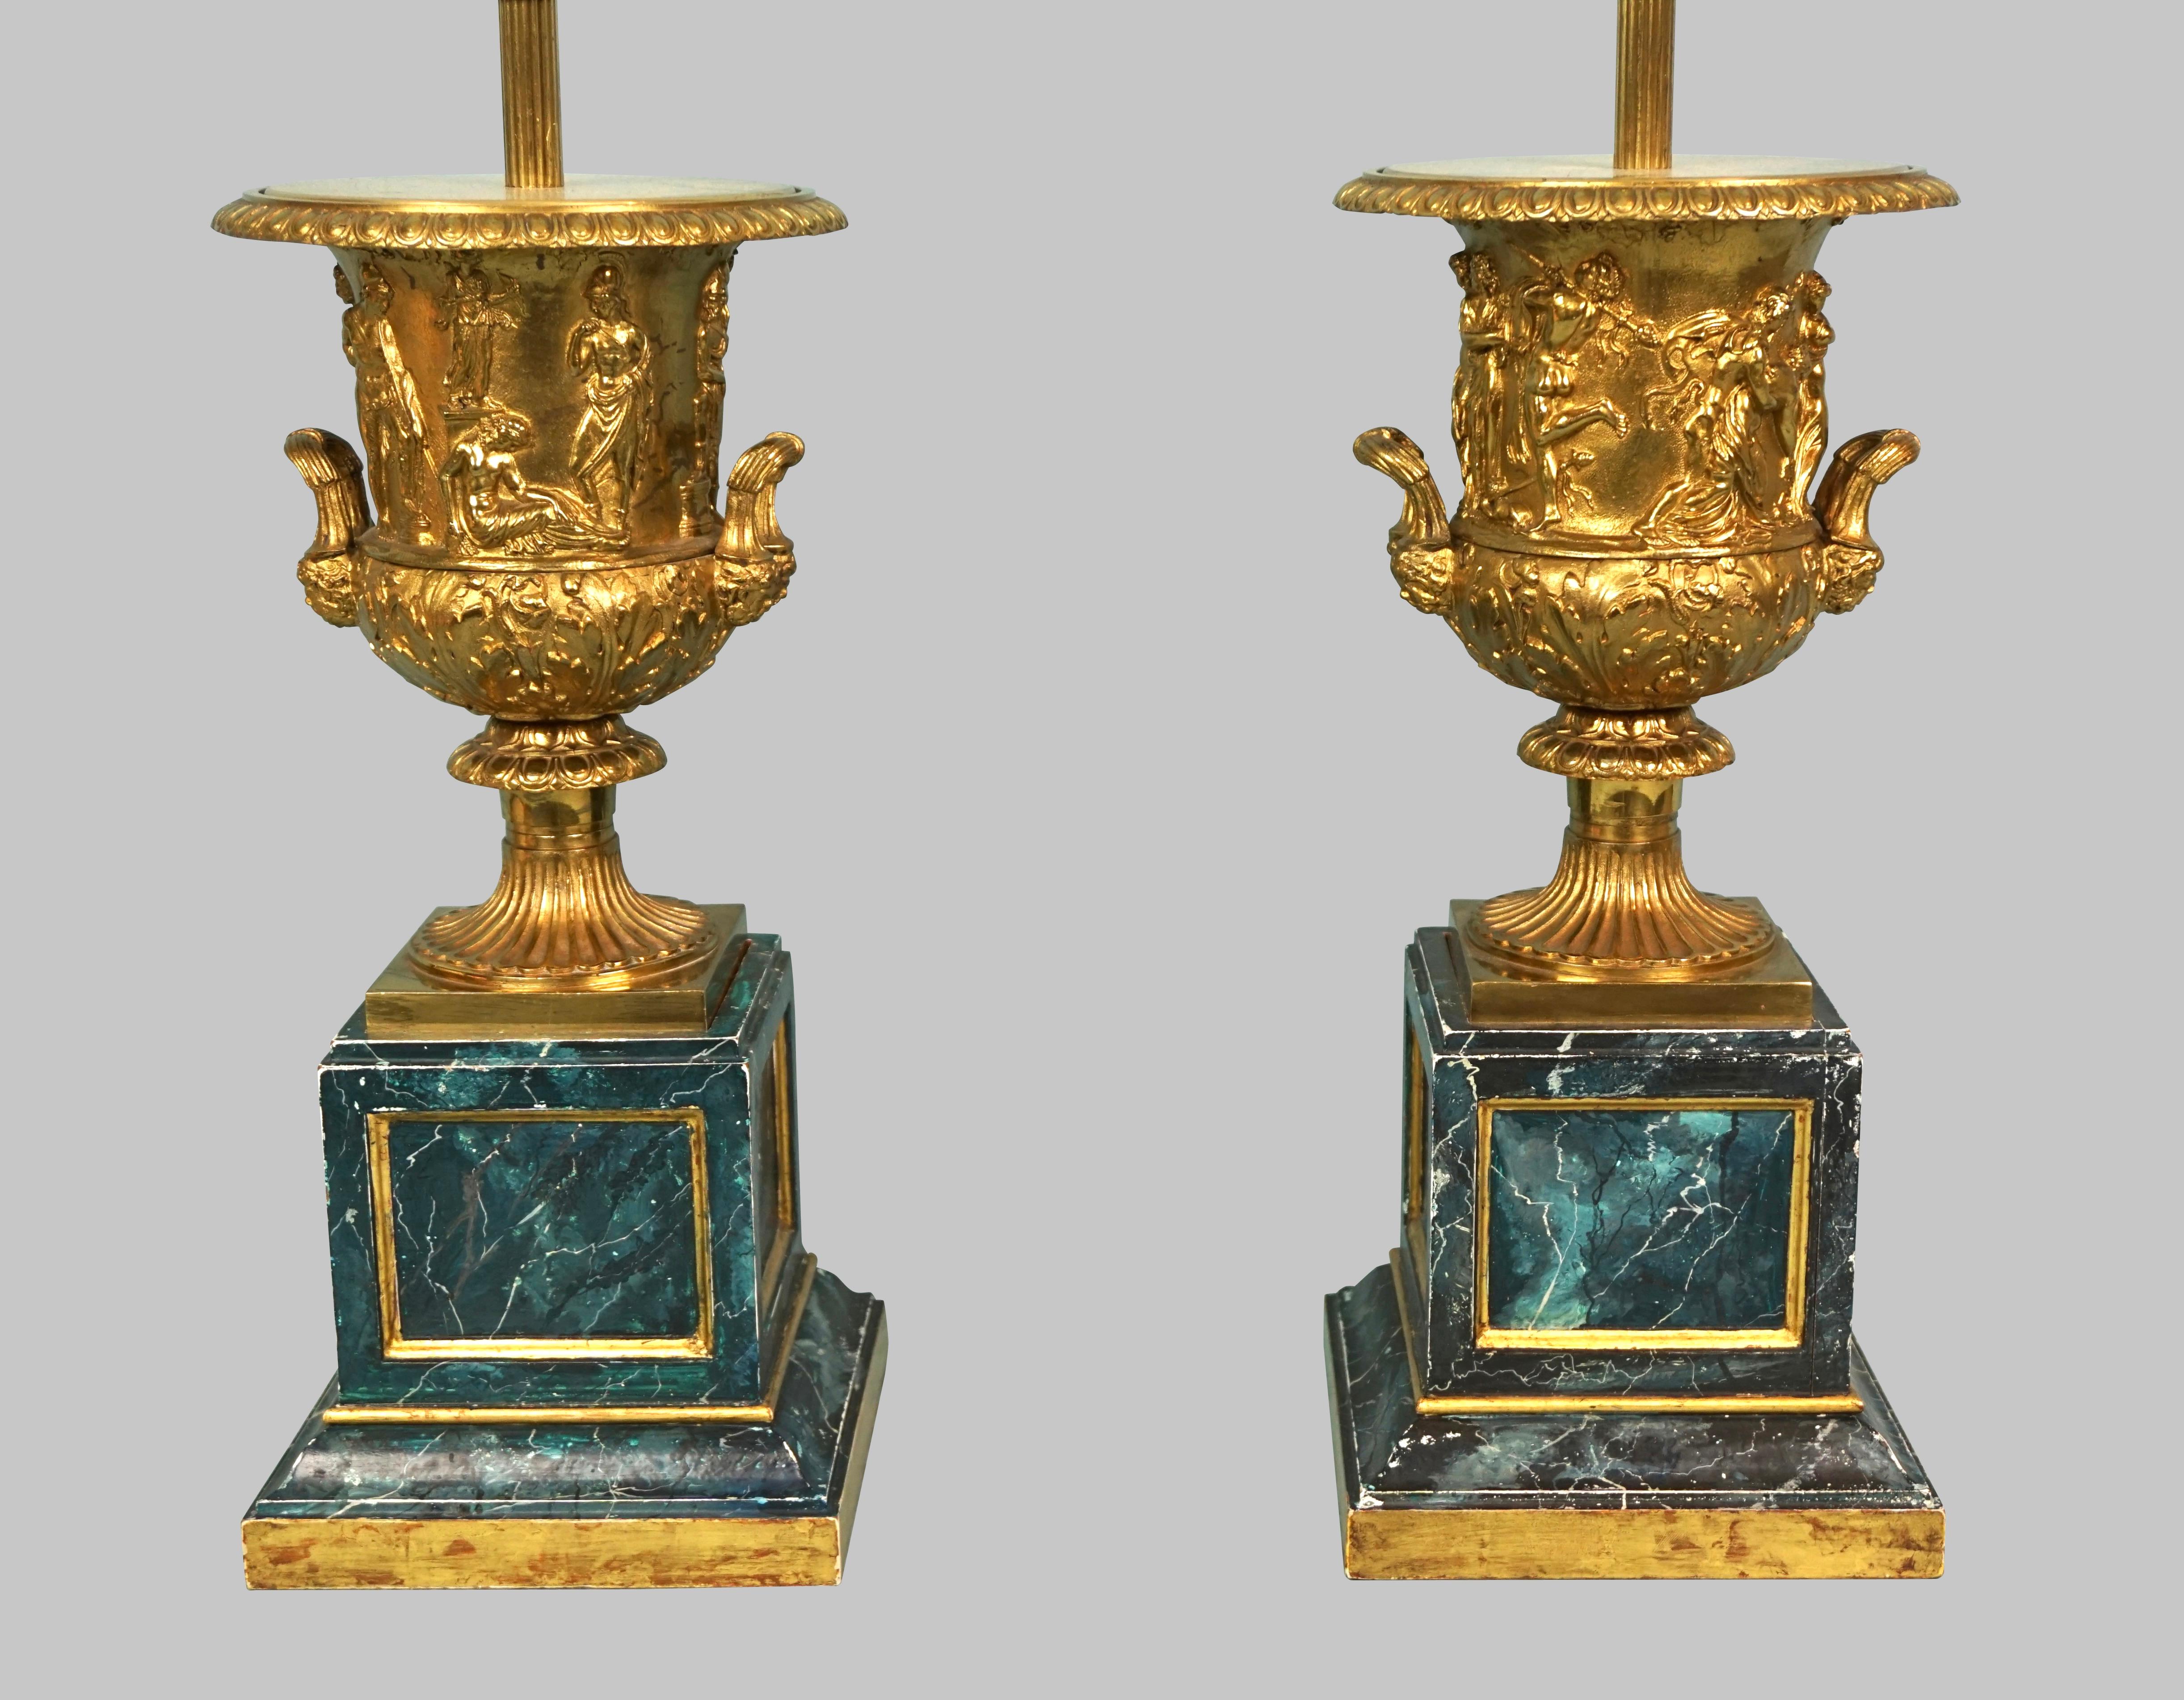 Neoclassical Revival Pair of Neoclassical Style Brass Urns Now as Lamps on Painted Faux Marble Bases